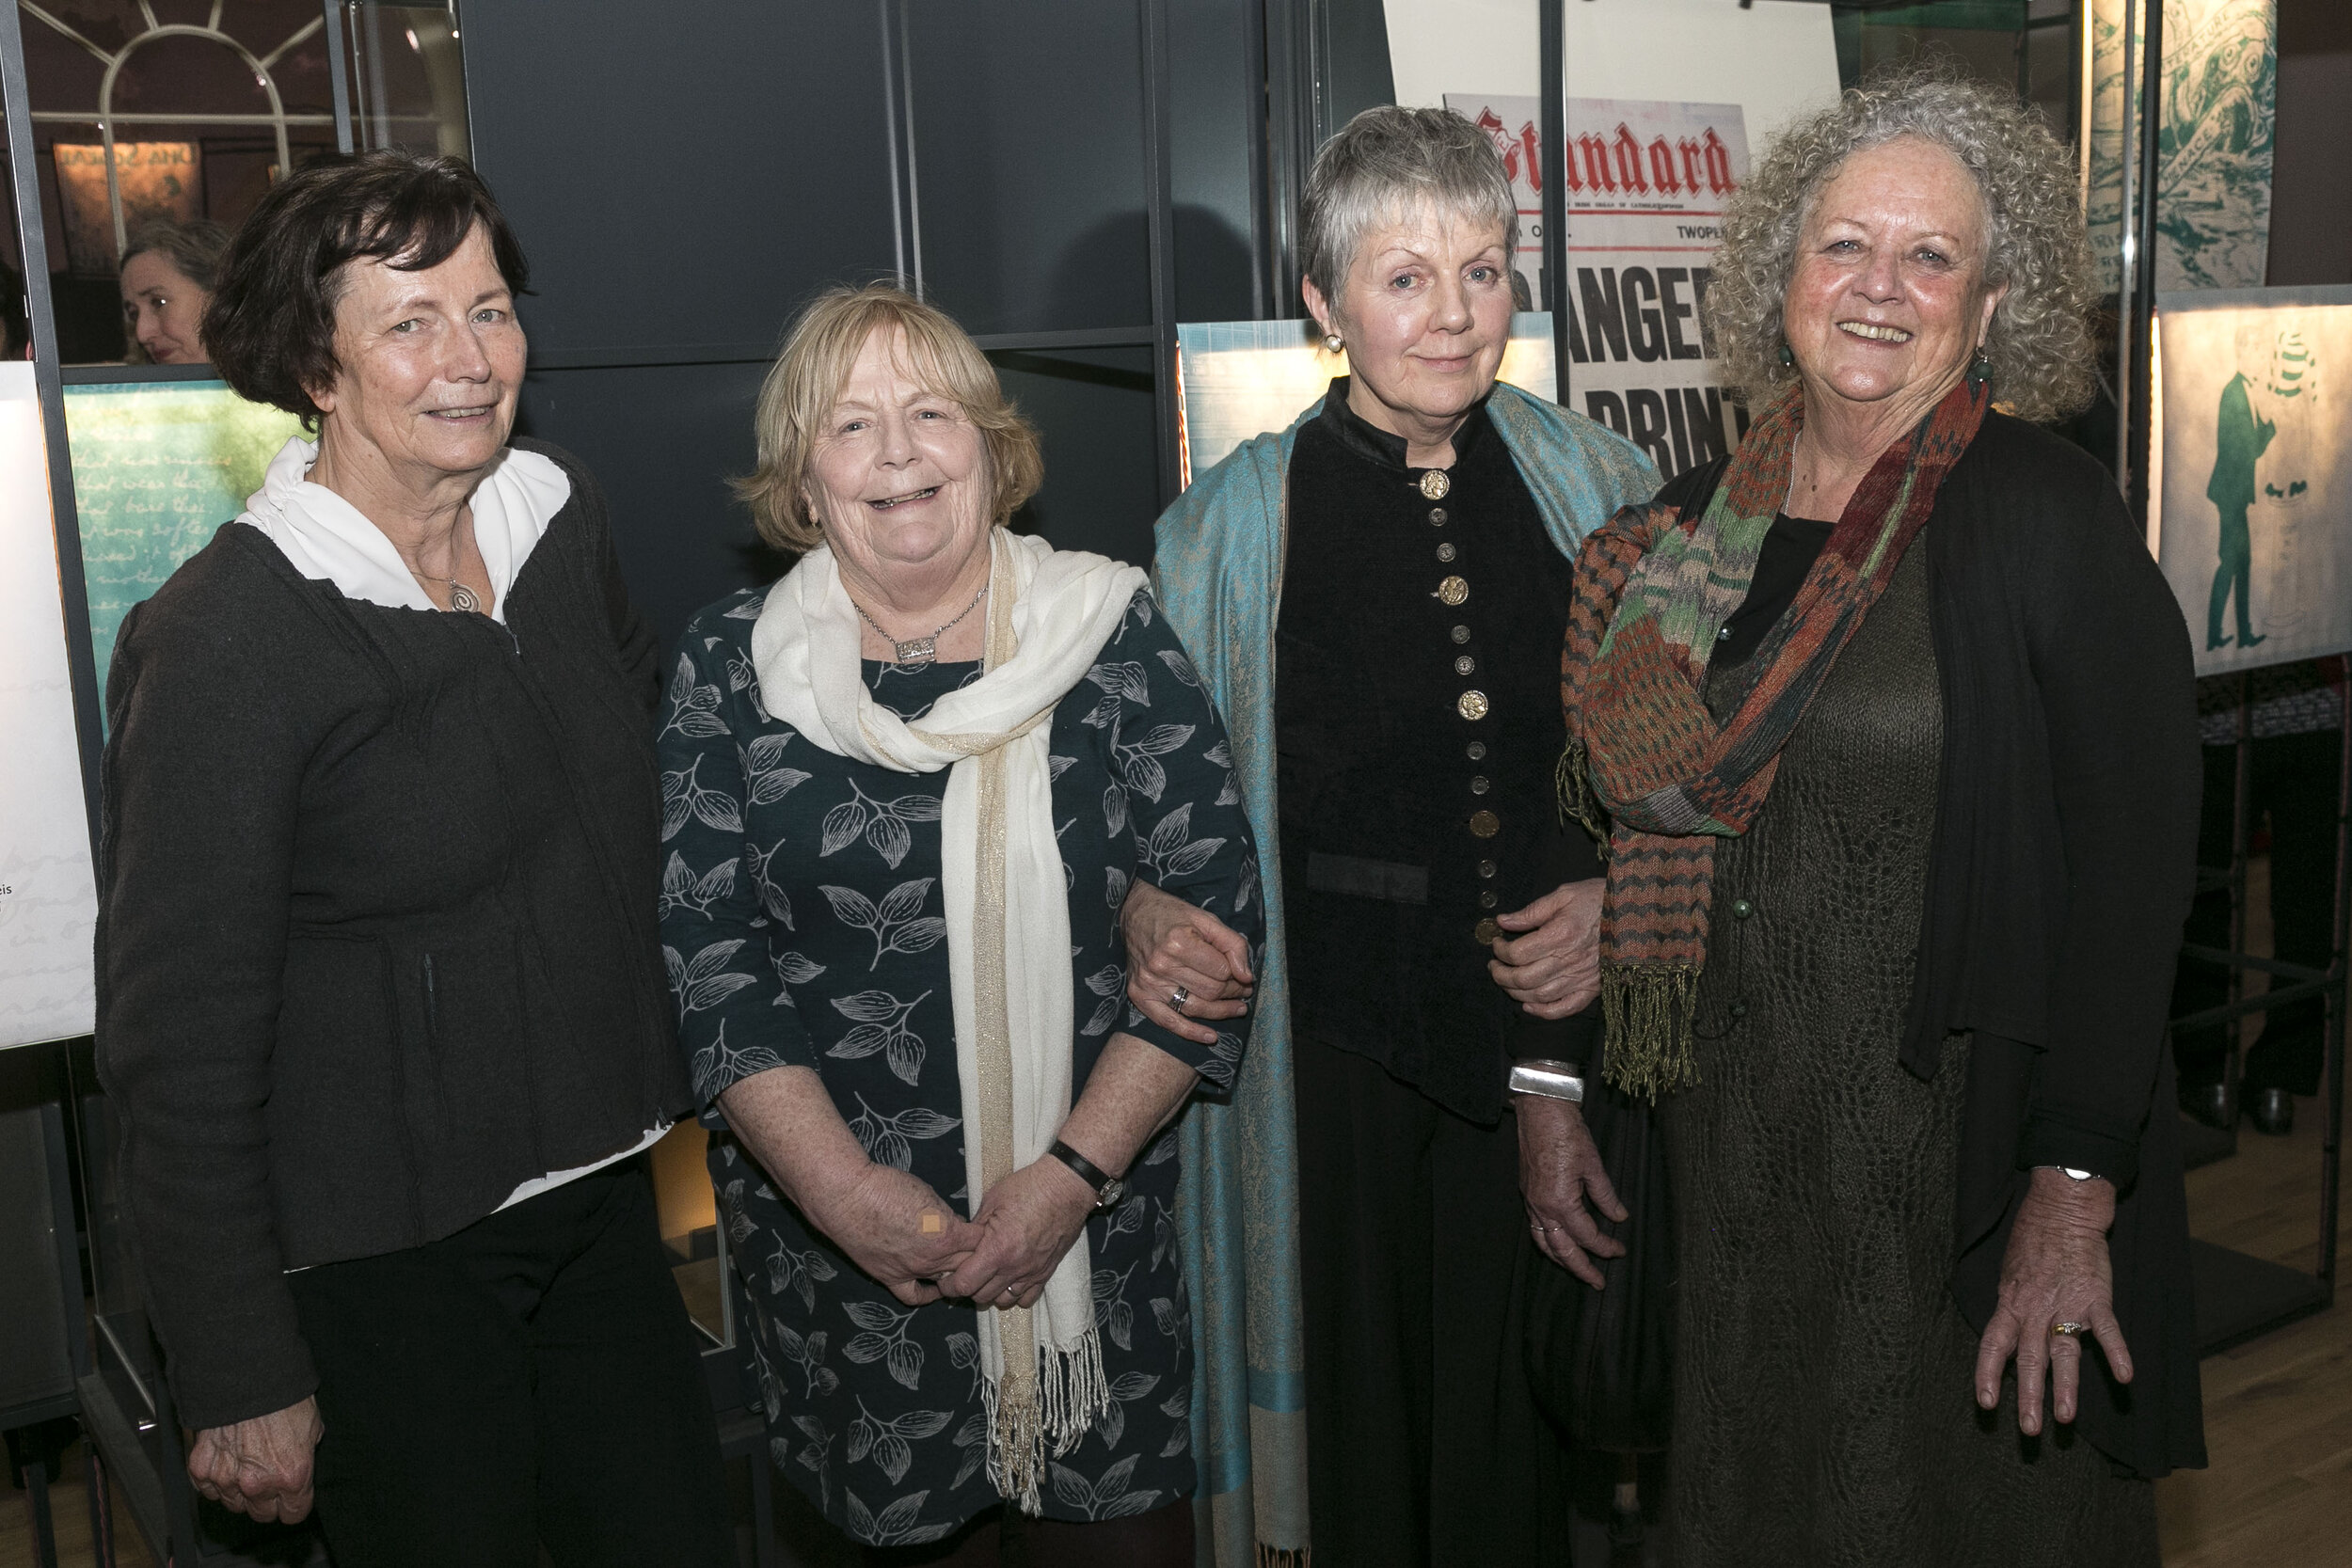  Colette Downey, Catherine MacConville, Brid MacConville, Vivien Murray  Hamilton Gallery / MoLi / DFAT - exhibition opening by Sabina Higgins of "Eva Gore-Booth 93 Irish women artists respond to her life and work", part of Brigids Day Lá Fhéile Bríd